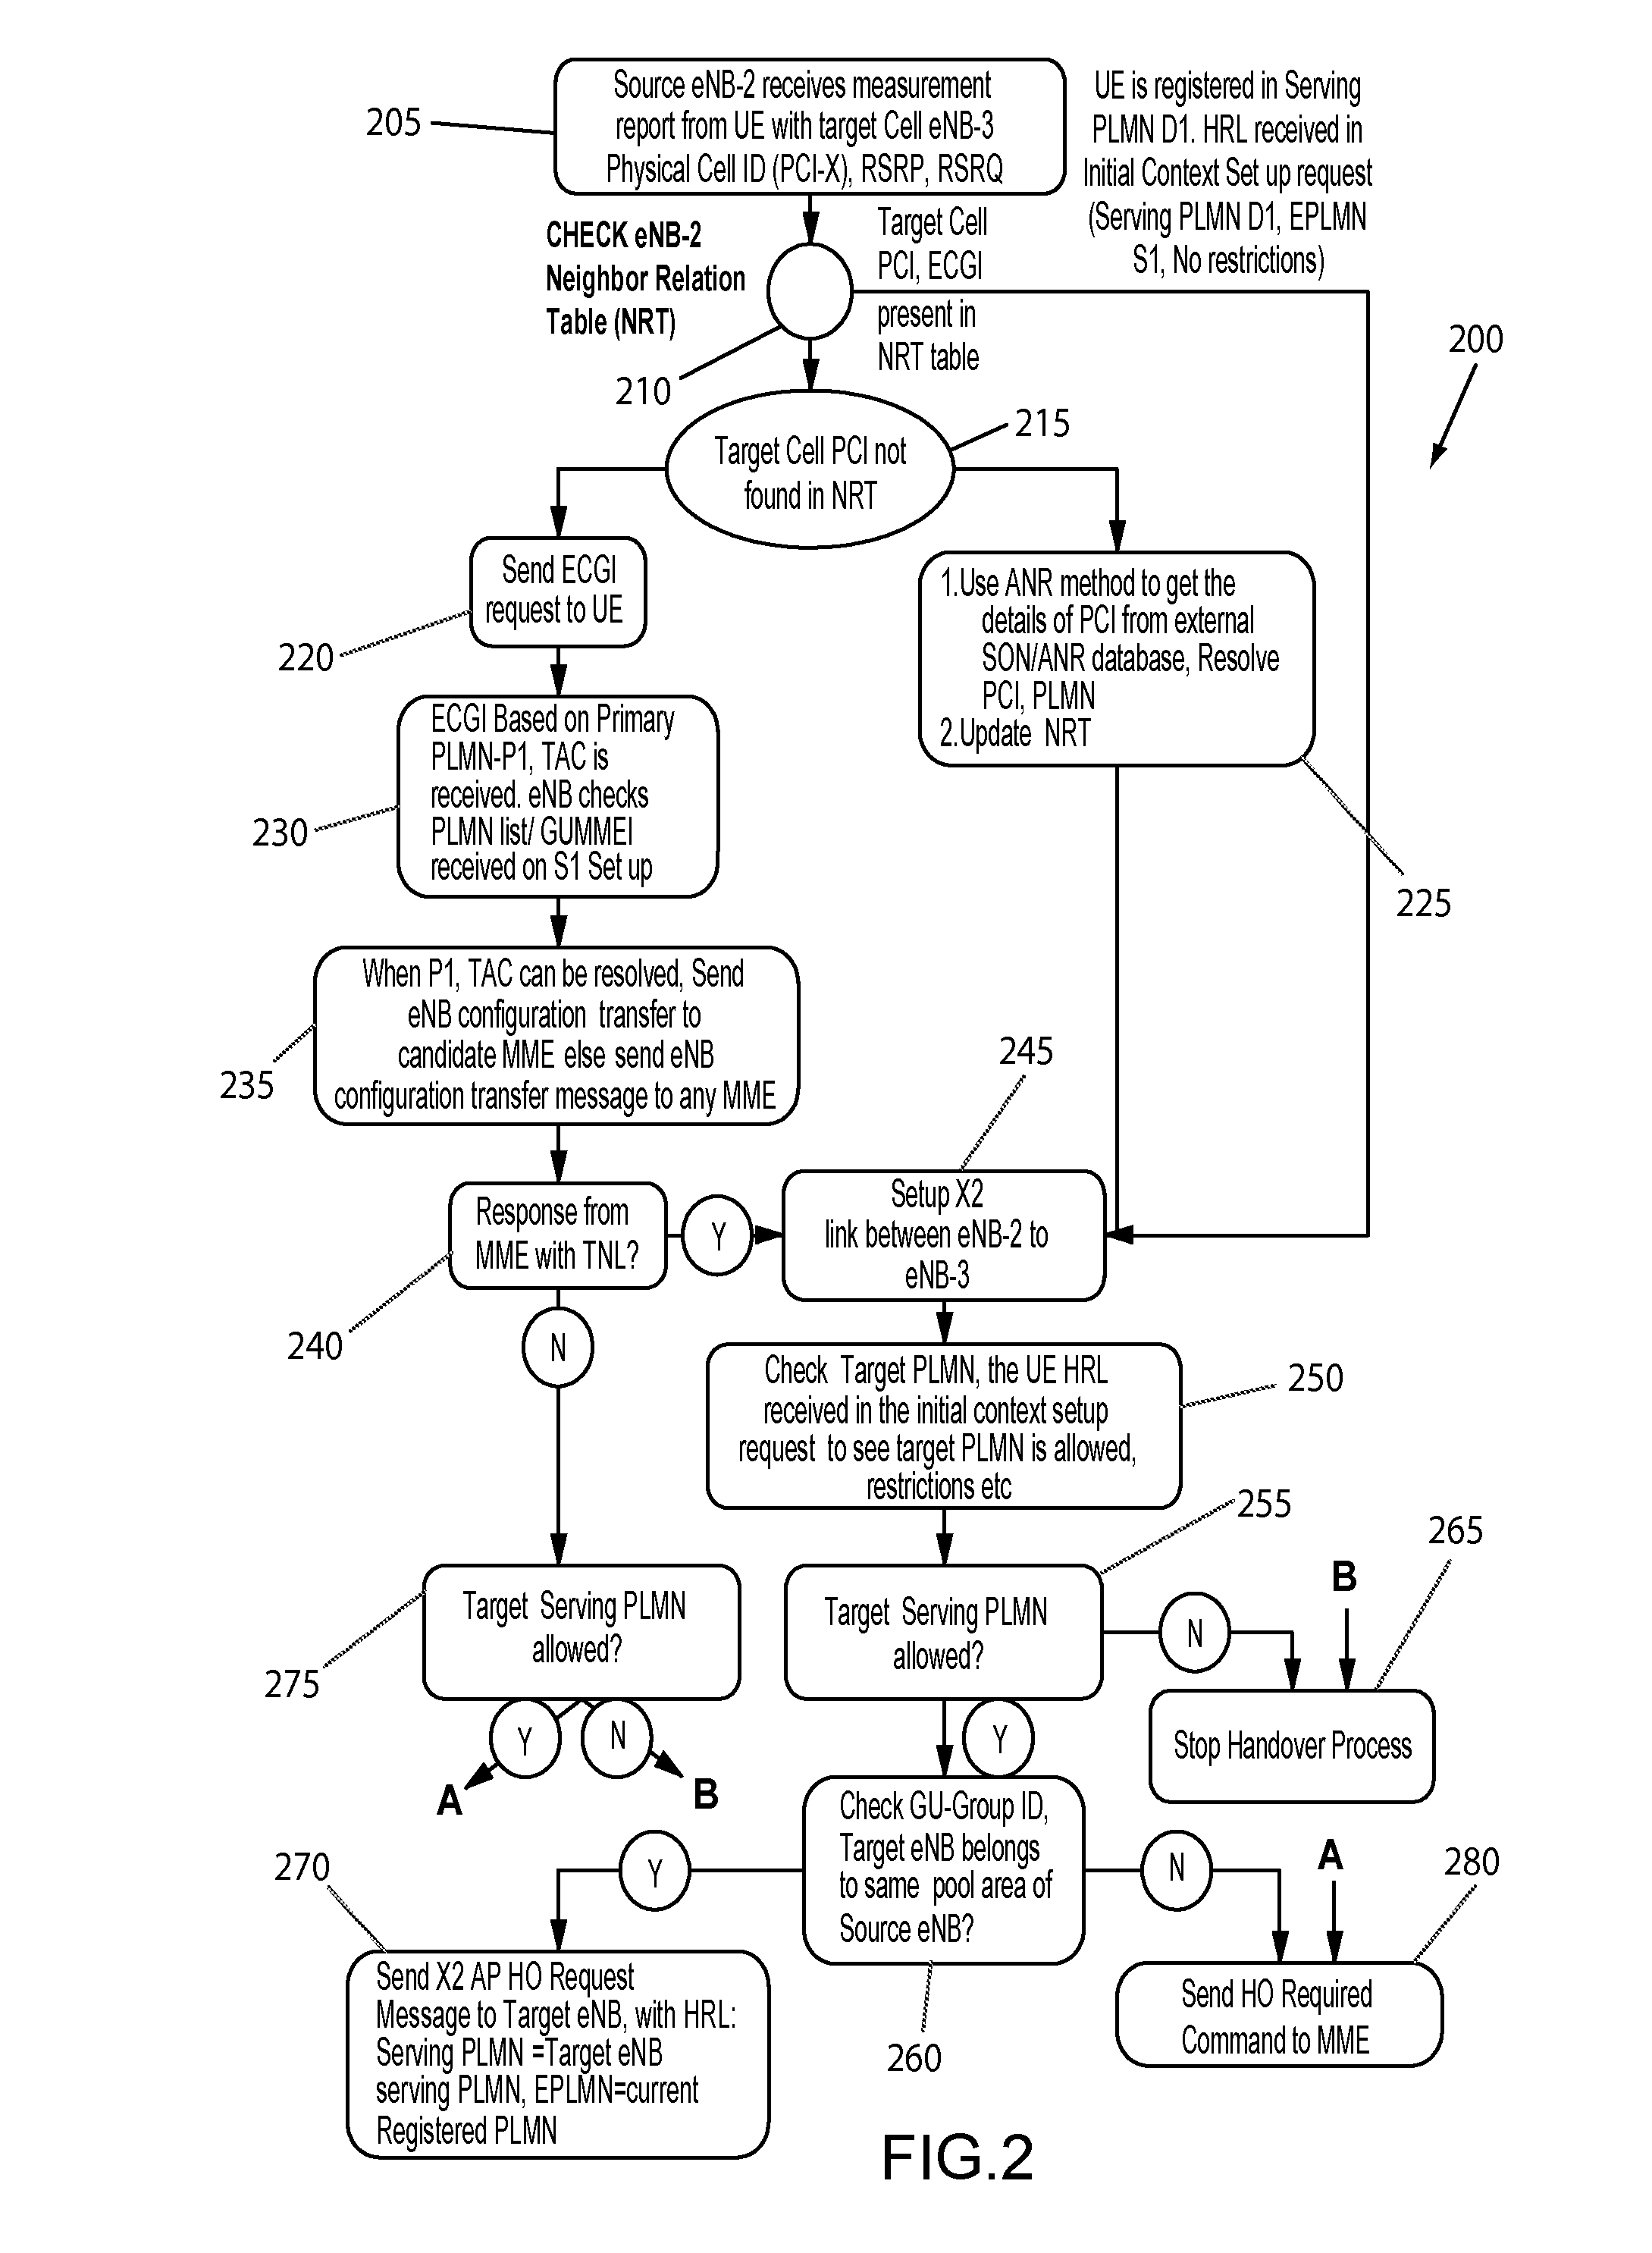 Public land mobile network resolution in a shared network and a dedicated network